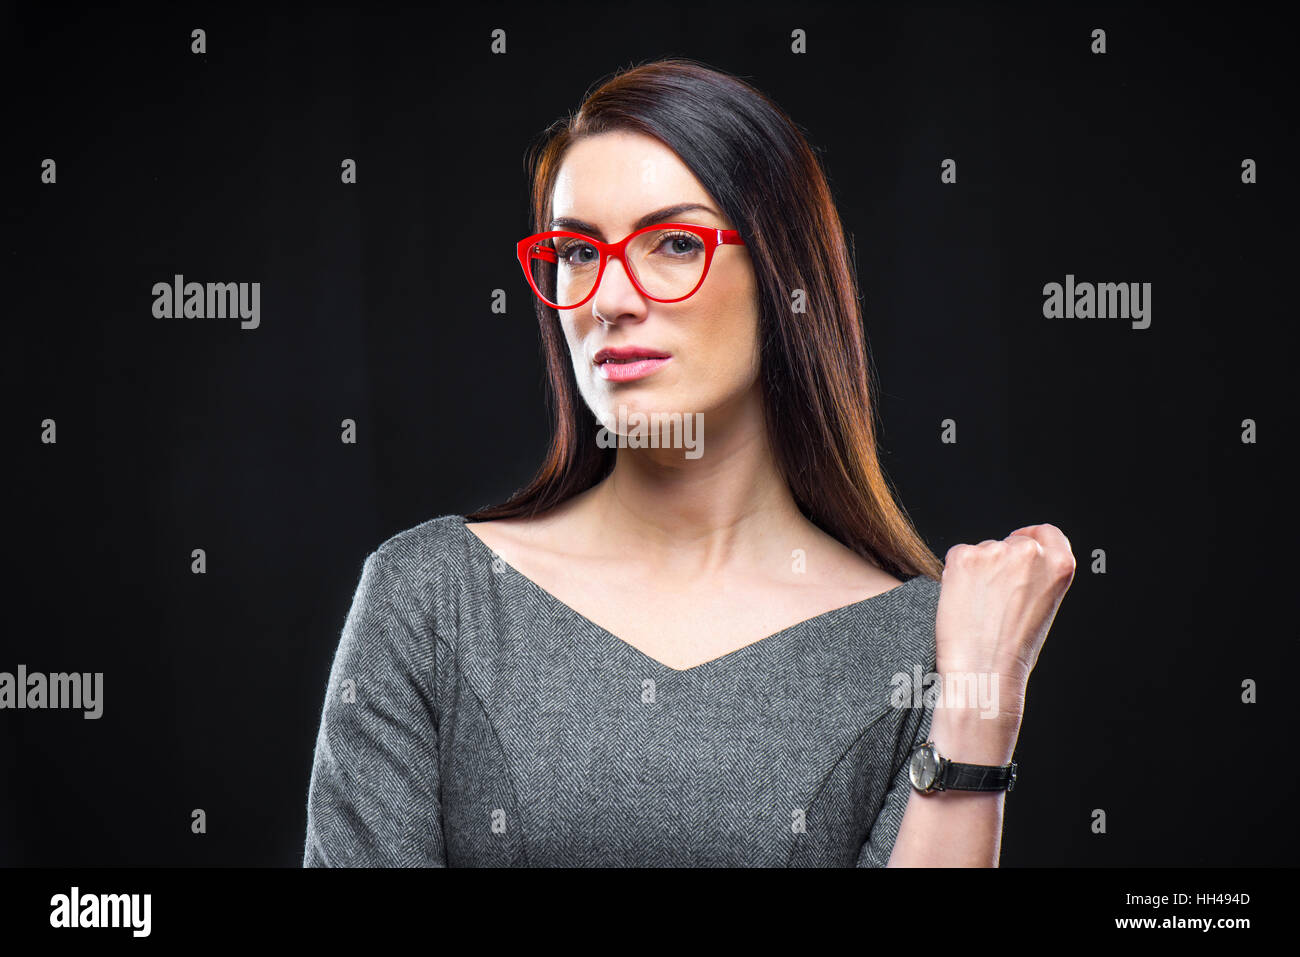 Portrait of pensive young woman in red eyeglasses looking at camera Stock Photo